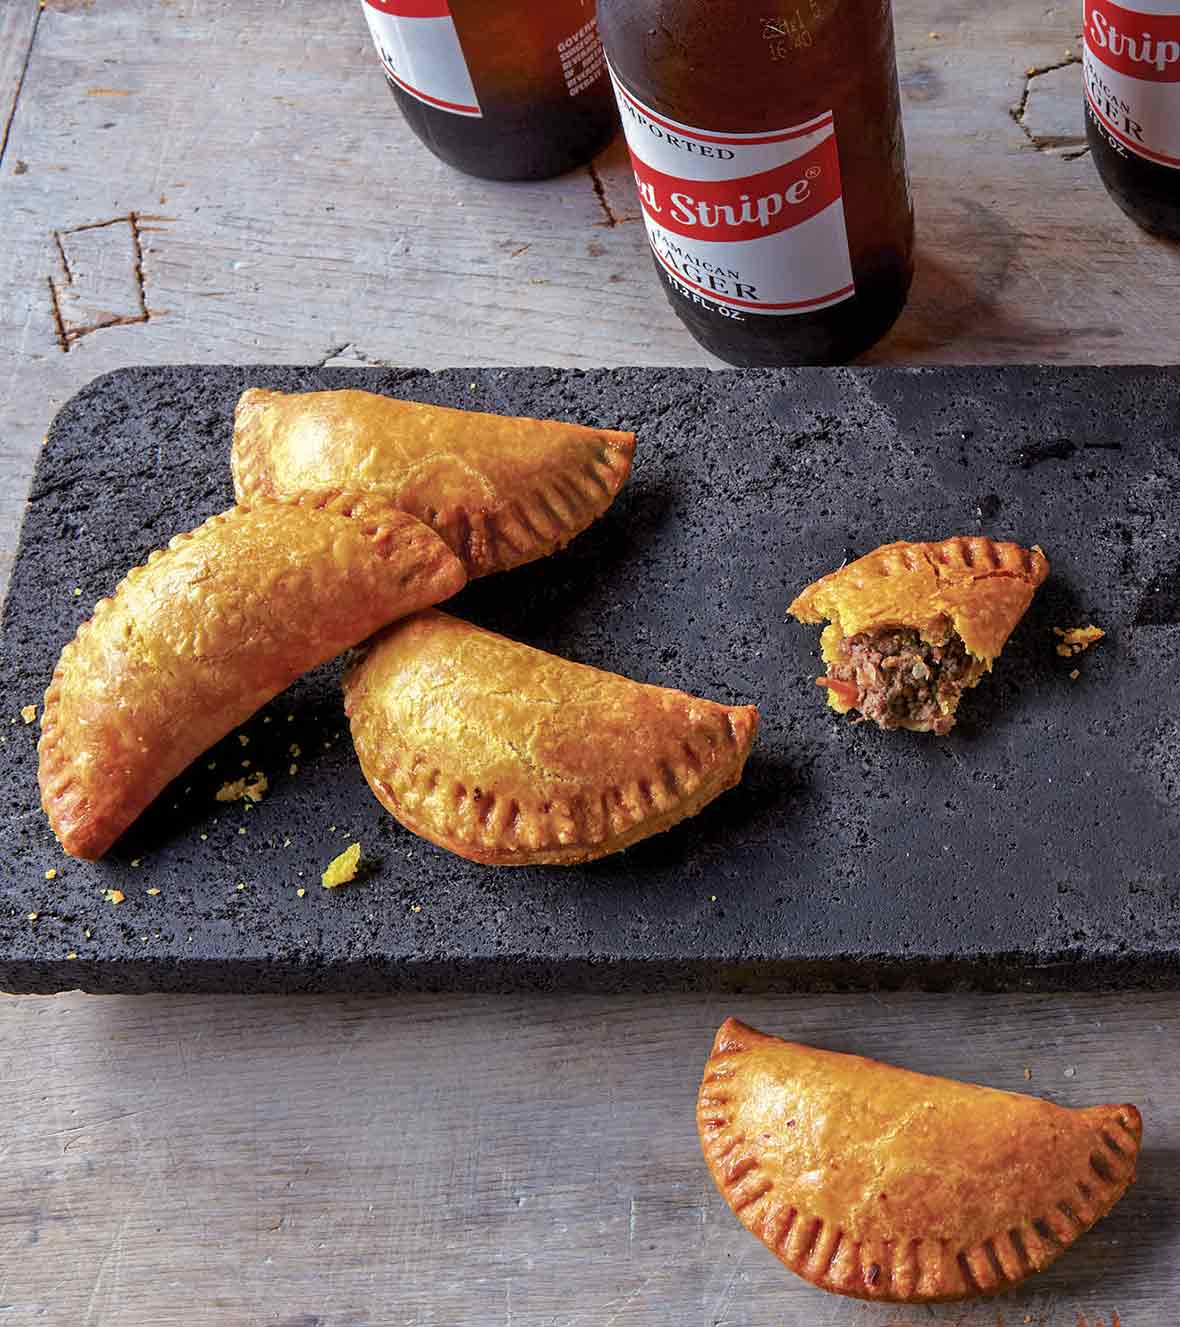 Five half-moon pastries, Jamaican beef turnovers, on a stone plate, three bottles of beer